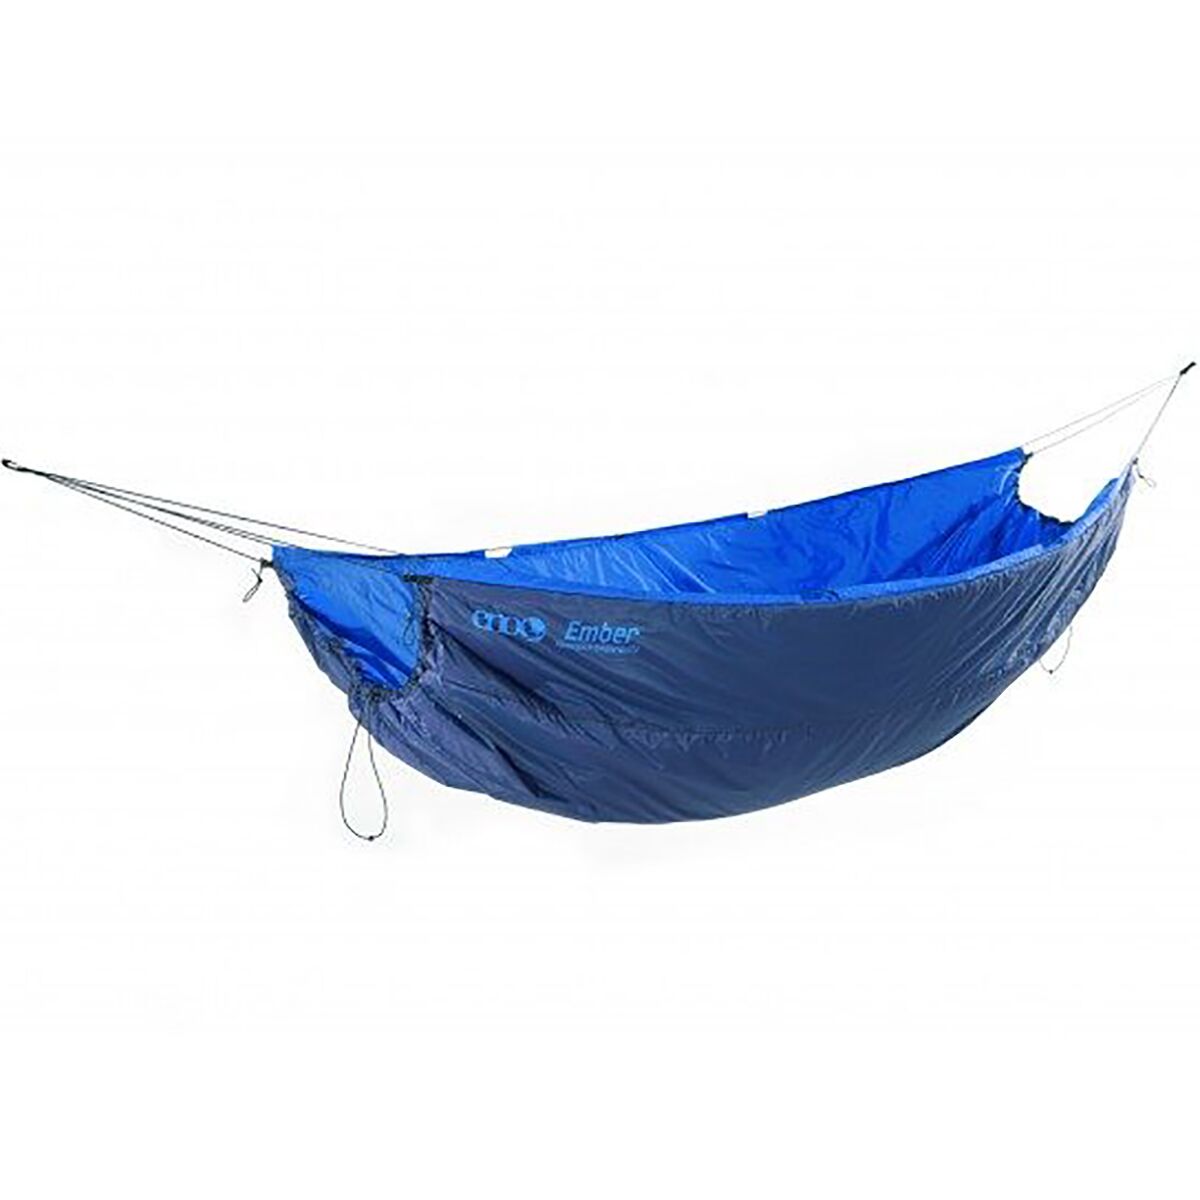 Eagles Nest Outfitters Ember Underquilt